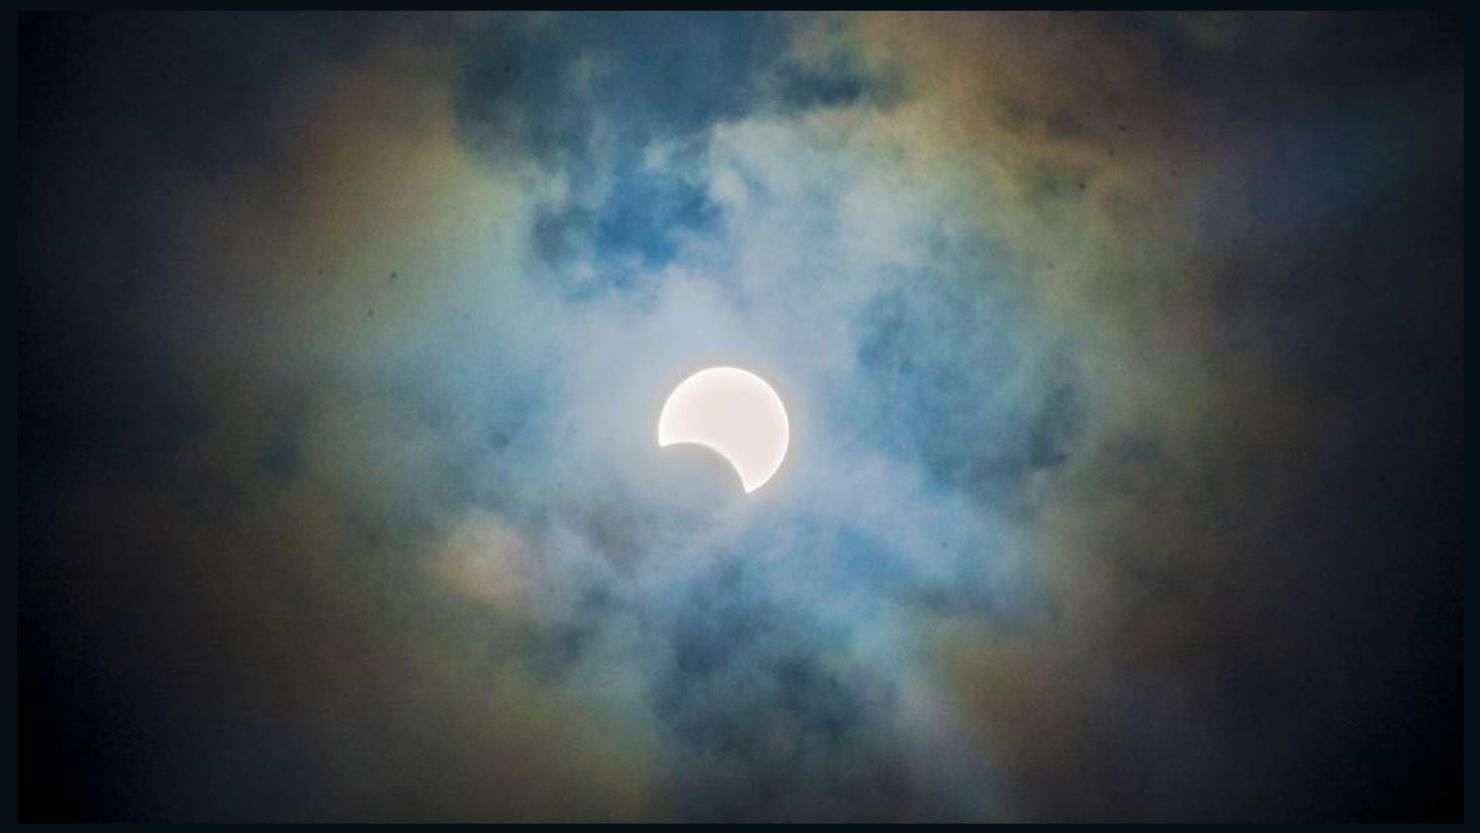 The 'ring of fire' solar eclipse graced the skies of Africa Thursday.